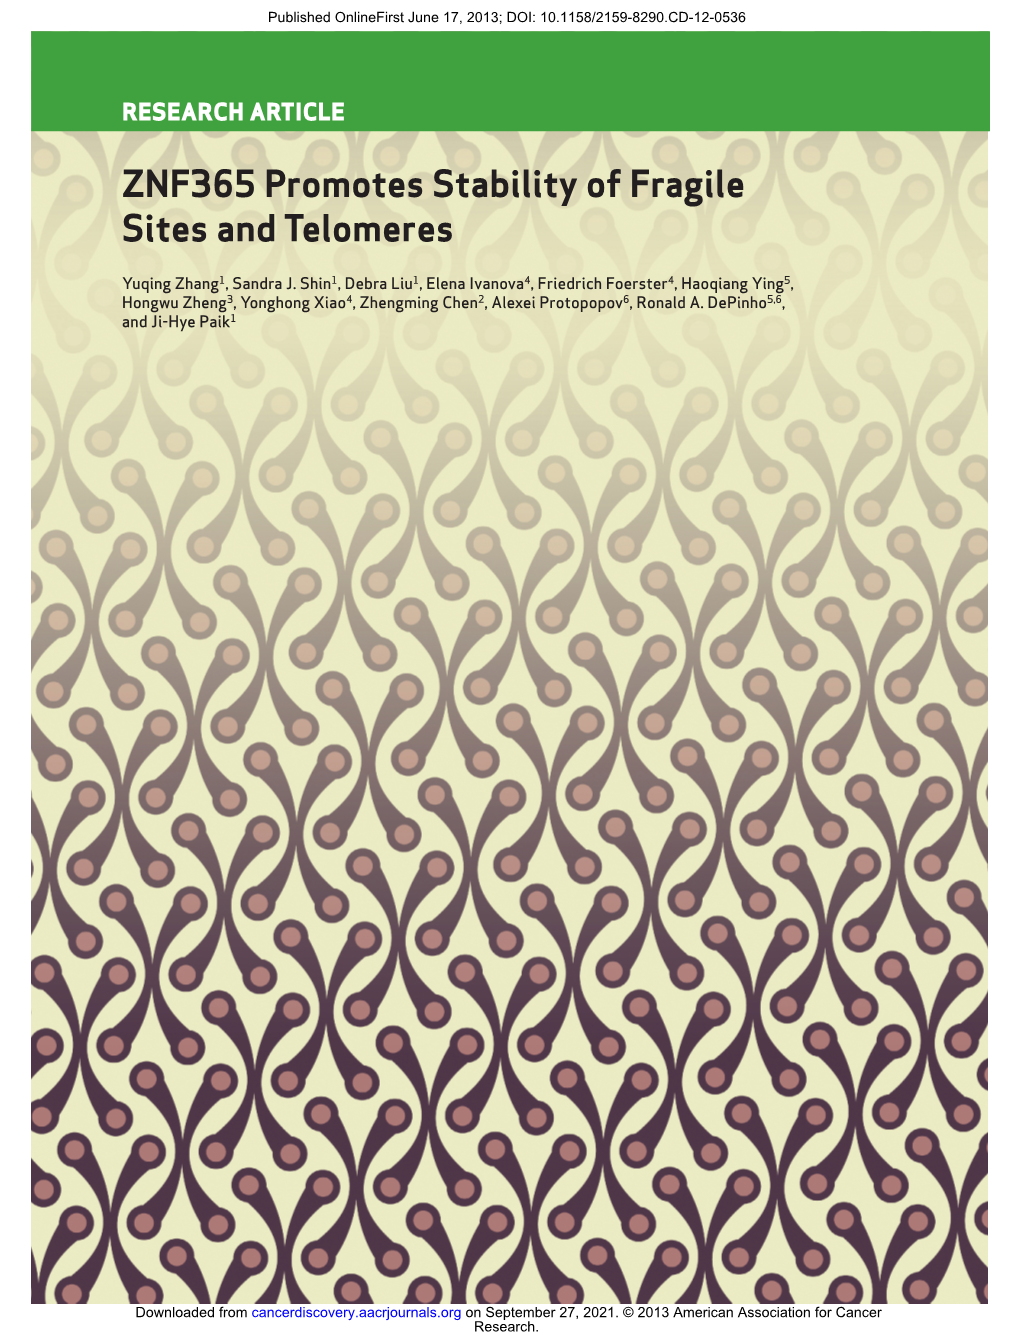 ZNF365 Promotes Stability of Fragile Sites and Telomeres